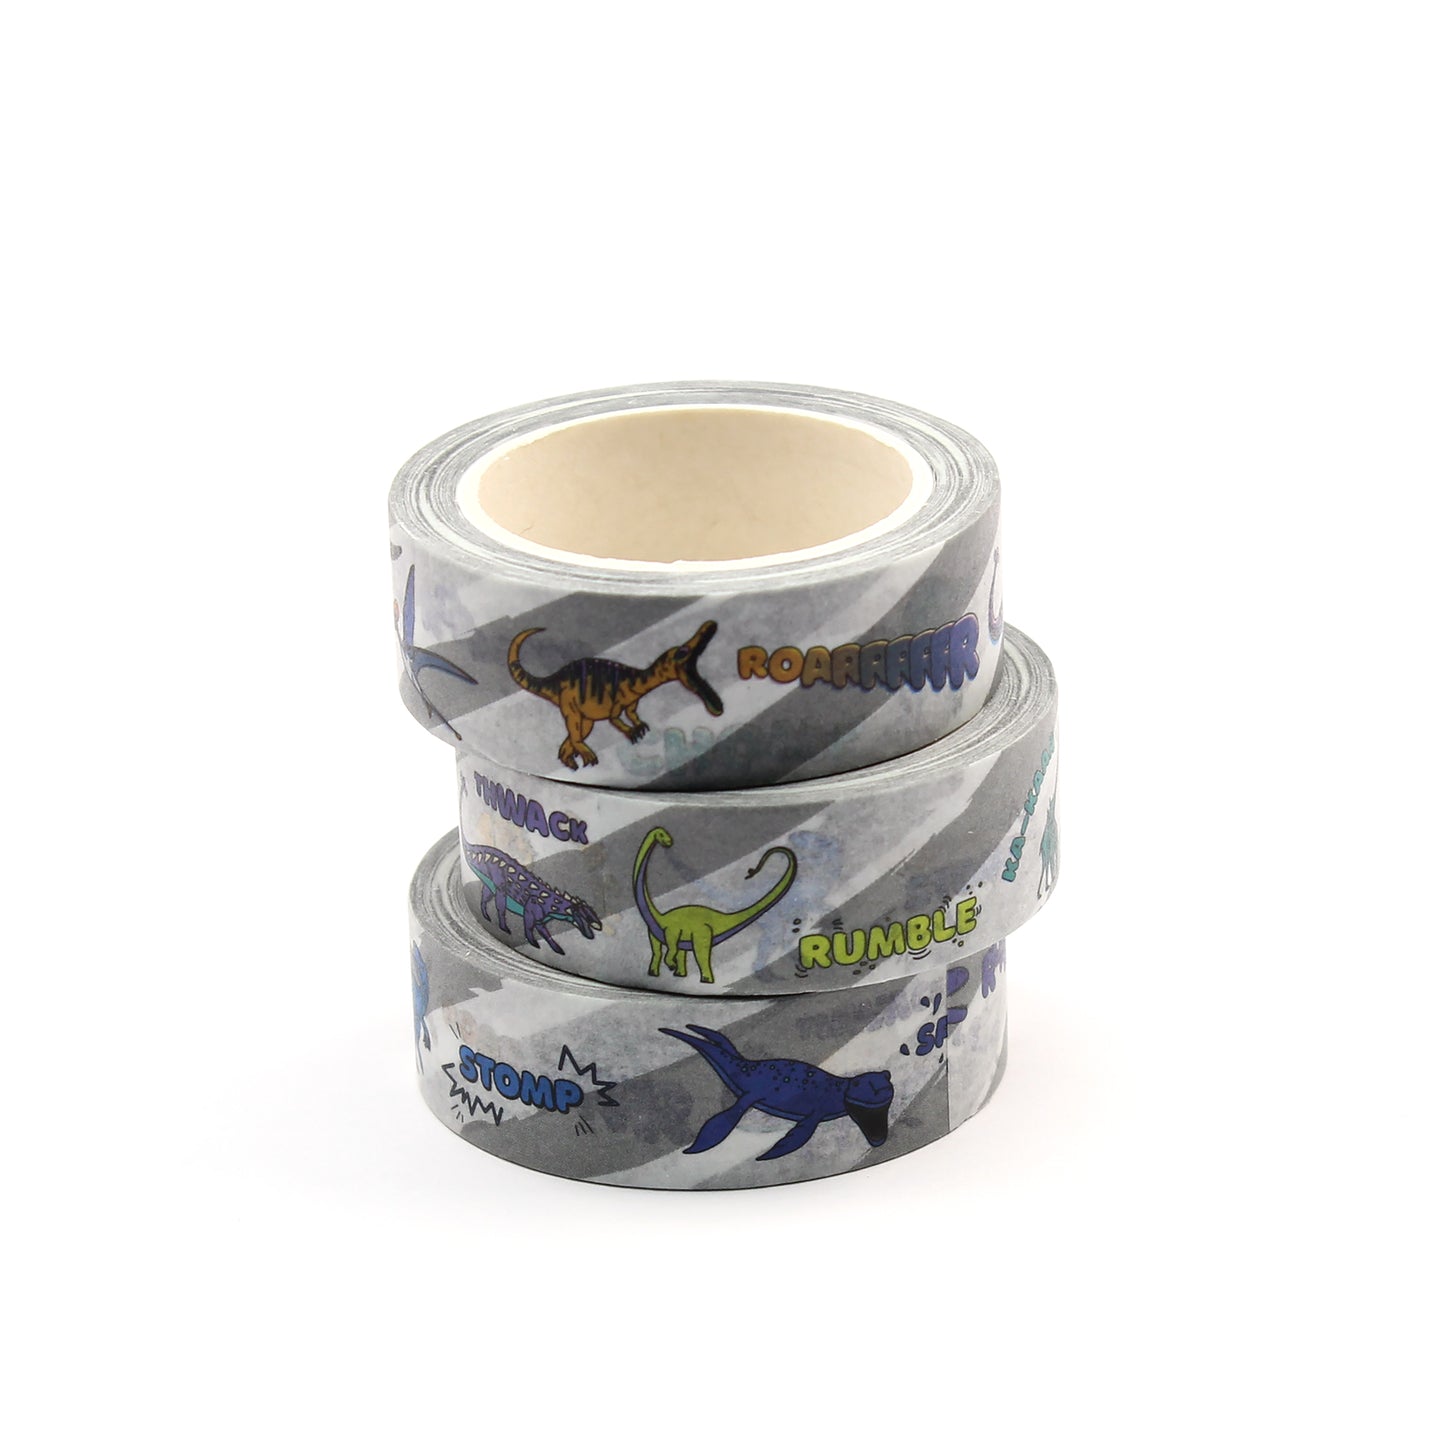 A stack of 3 rolls of dinosaur words washi tape